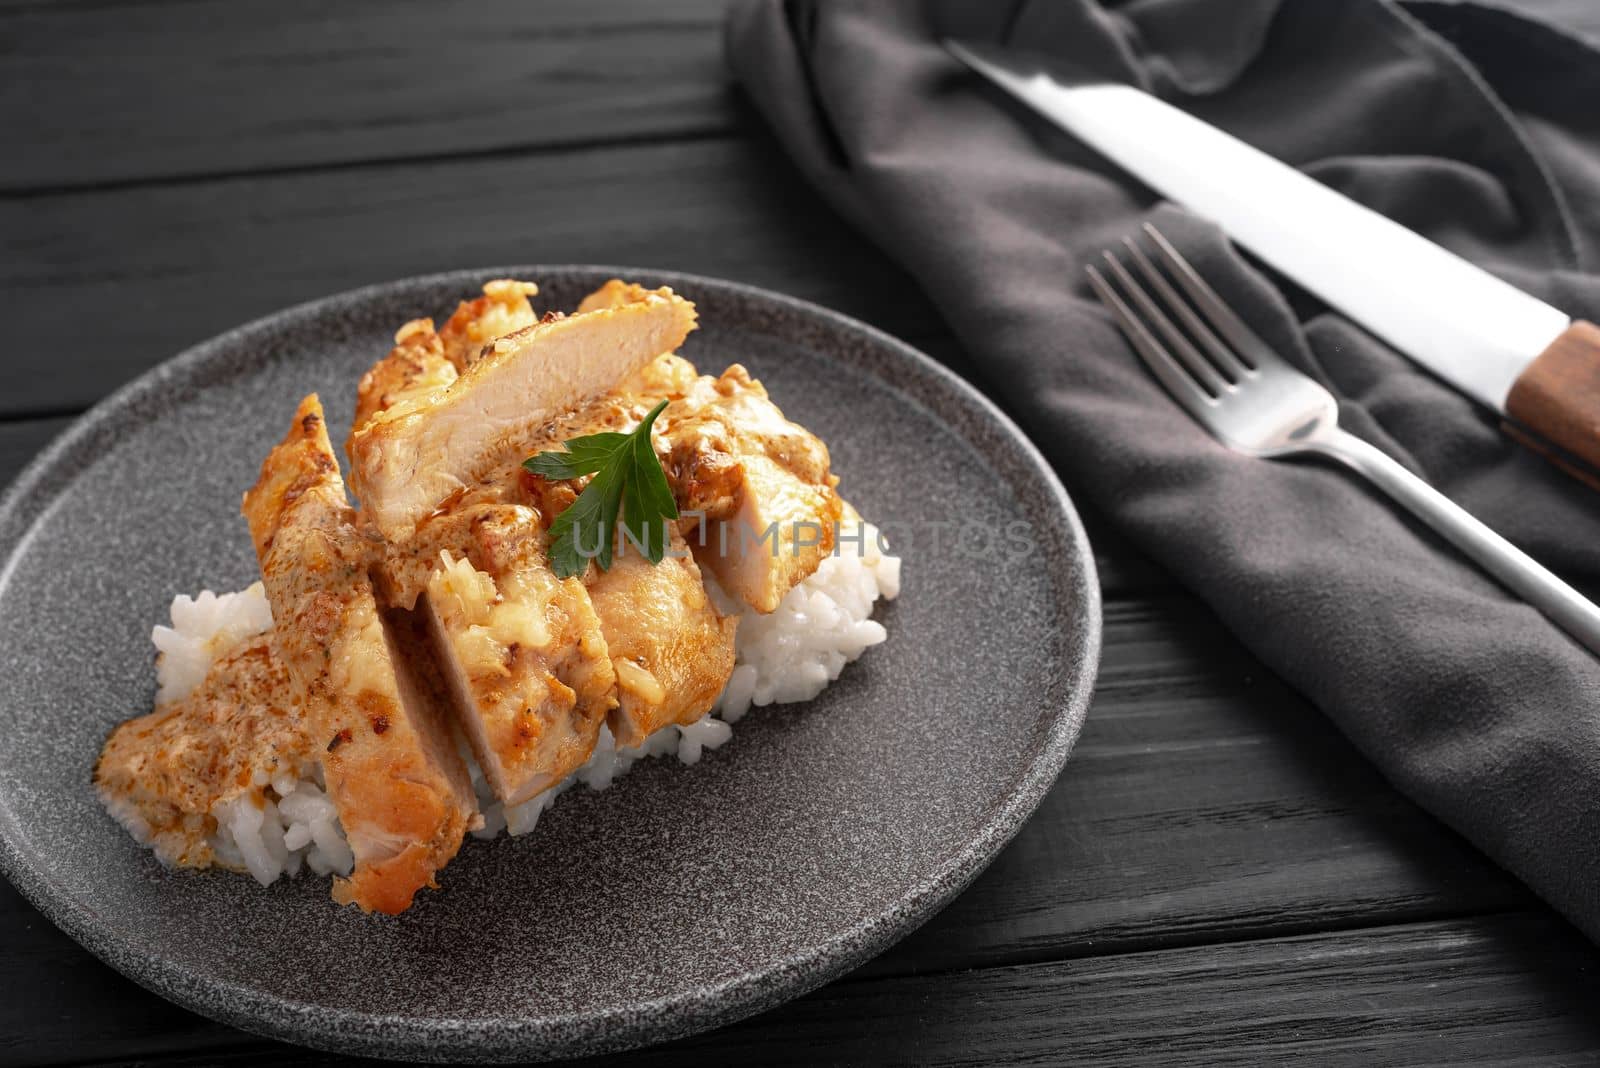 In a creamy sauce, a chicken breast with rice sliced into pieces on a dark background in a gray plate. Next to it is a knife and fork